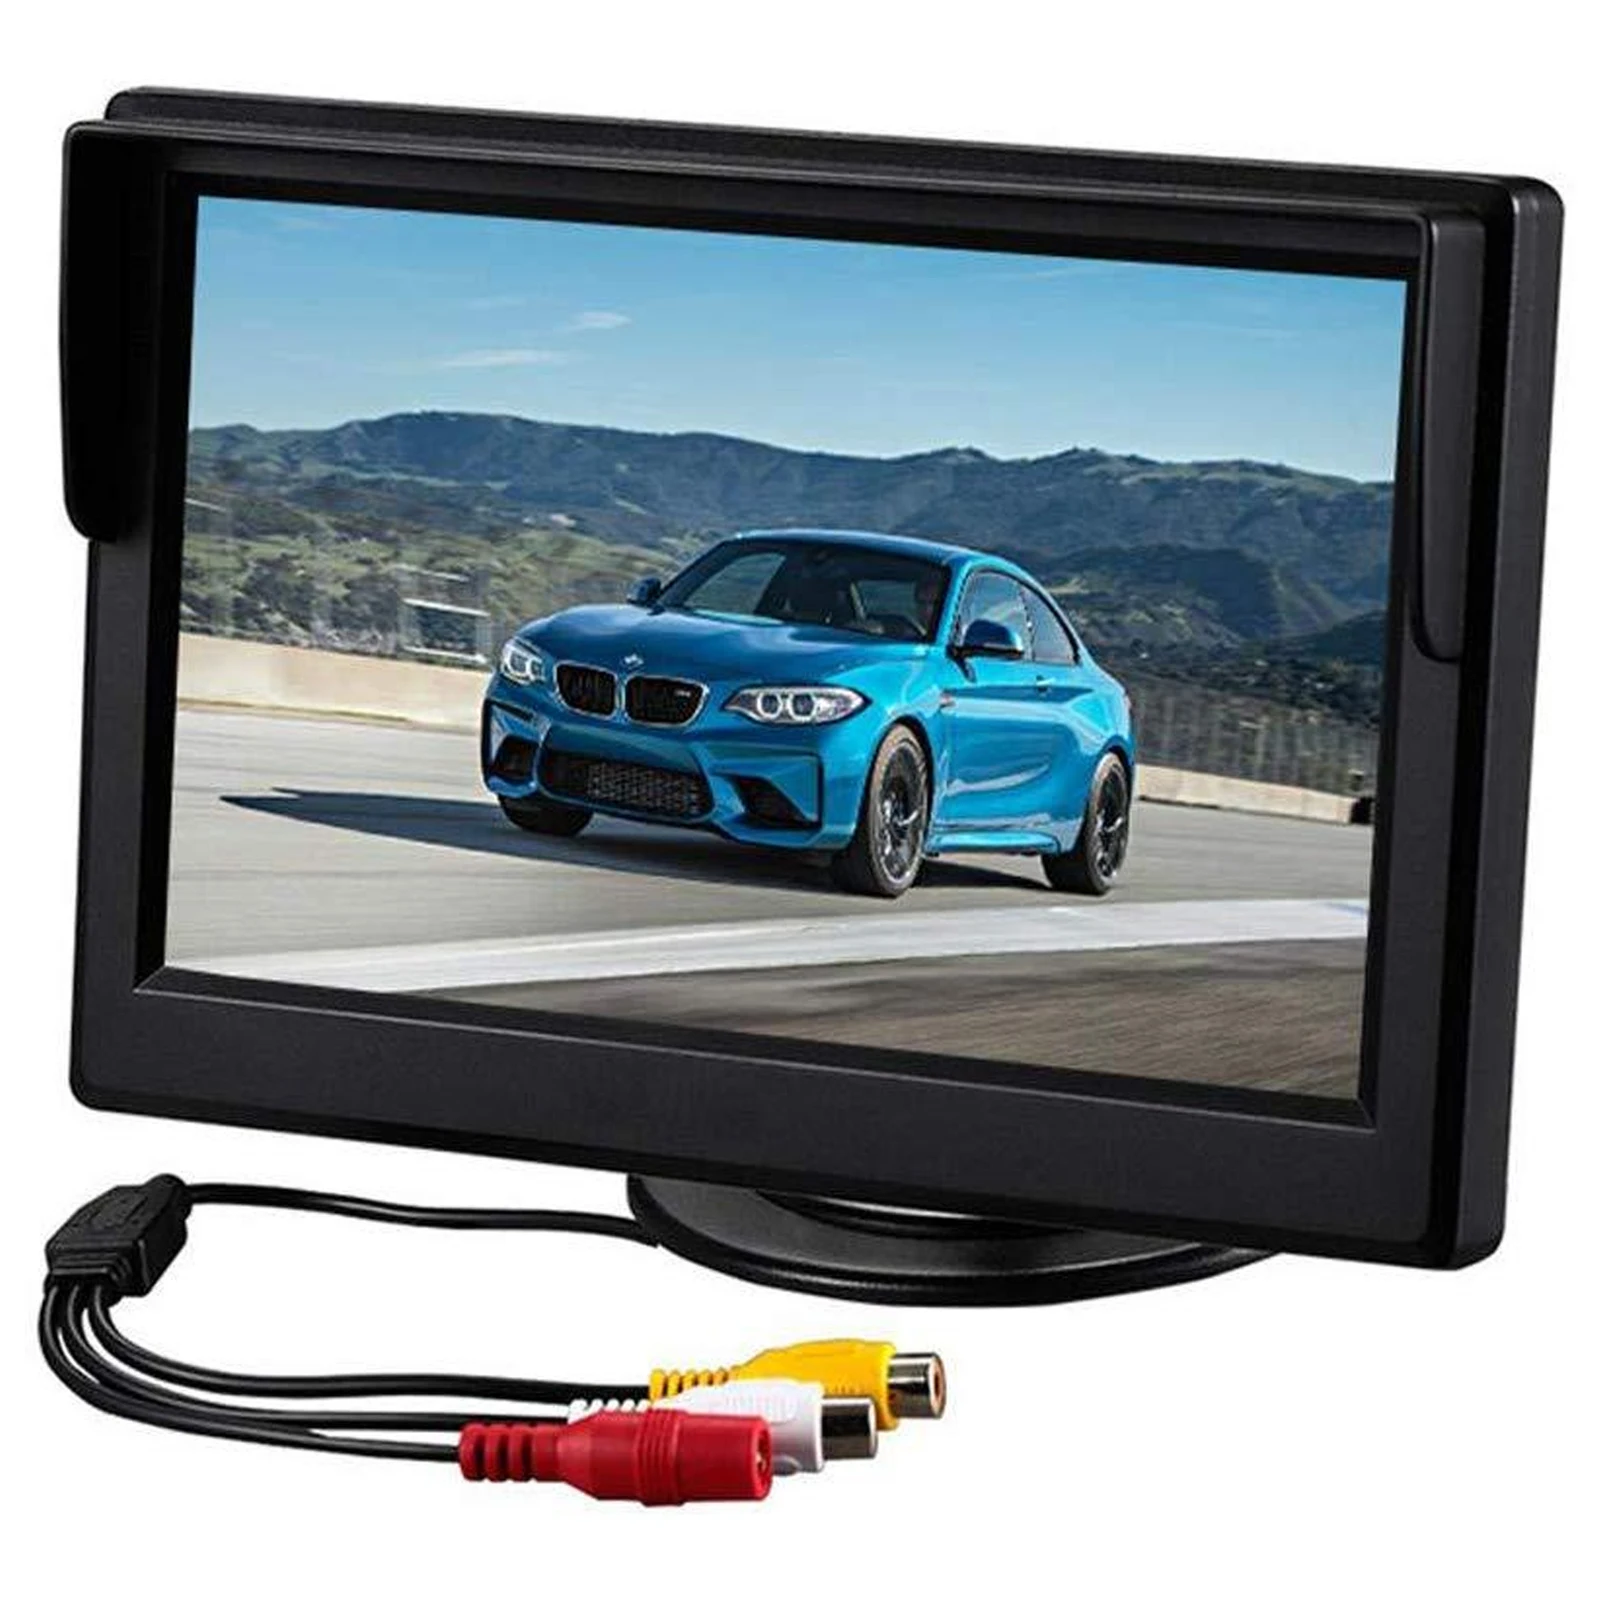 

Goramsay 5 Inch 800X480 TFT LCD HD Screen Monitor With Dual Mounting Bracket For Car Backup Camera/Rear View/DVD/Media Player